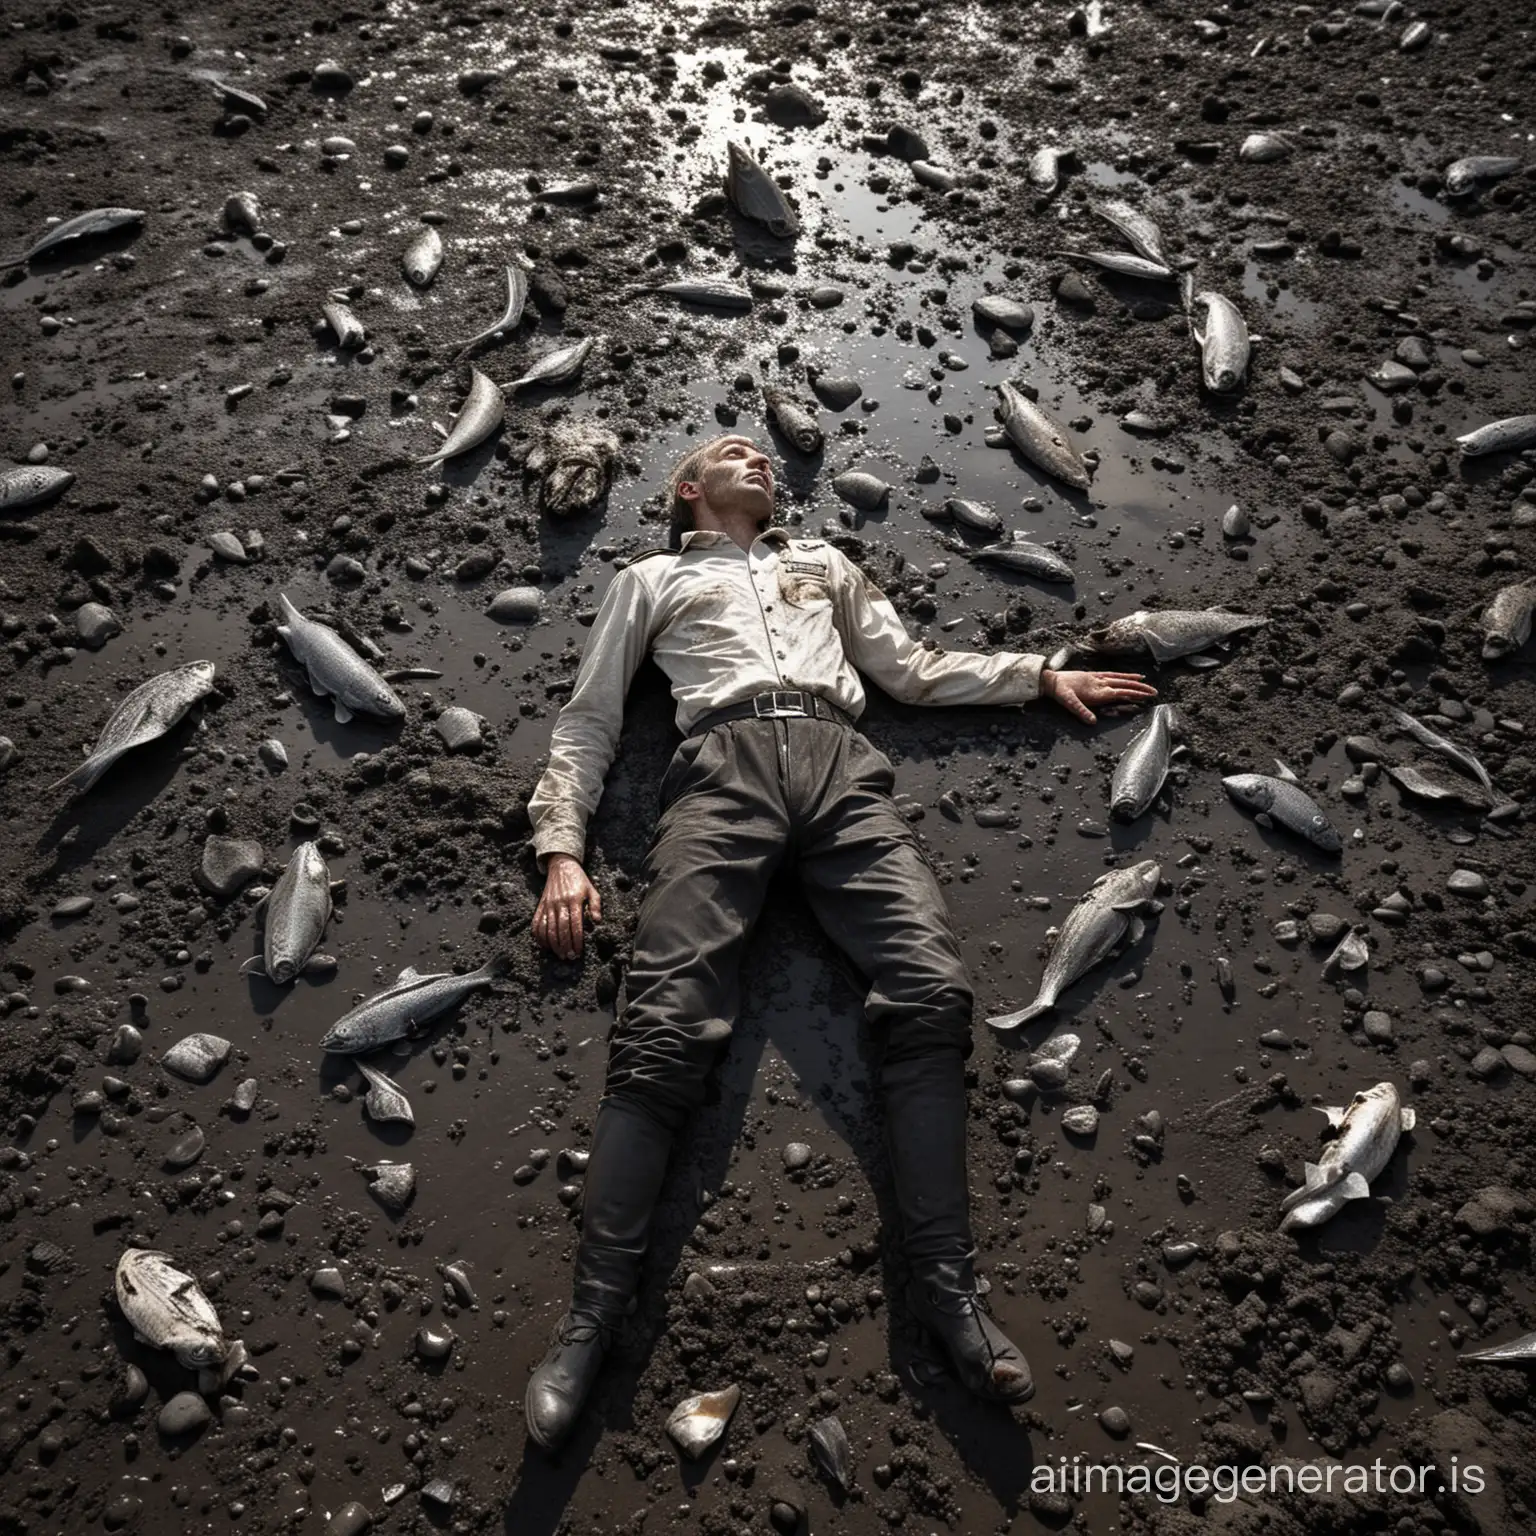 The exhausted sailor lies on damp black earth stretching in all directions. The sun shines mercilessly. Rotting dead fish were scattered around, and amid the repulsive mud of the endless black plain, there protruded even less understandable remains.